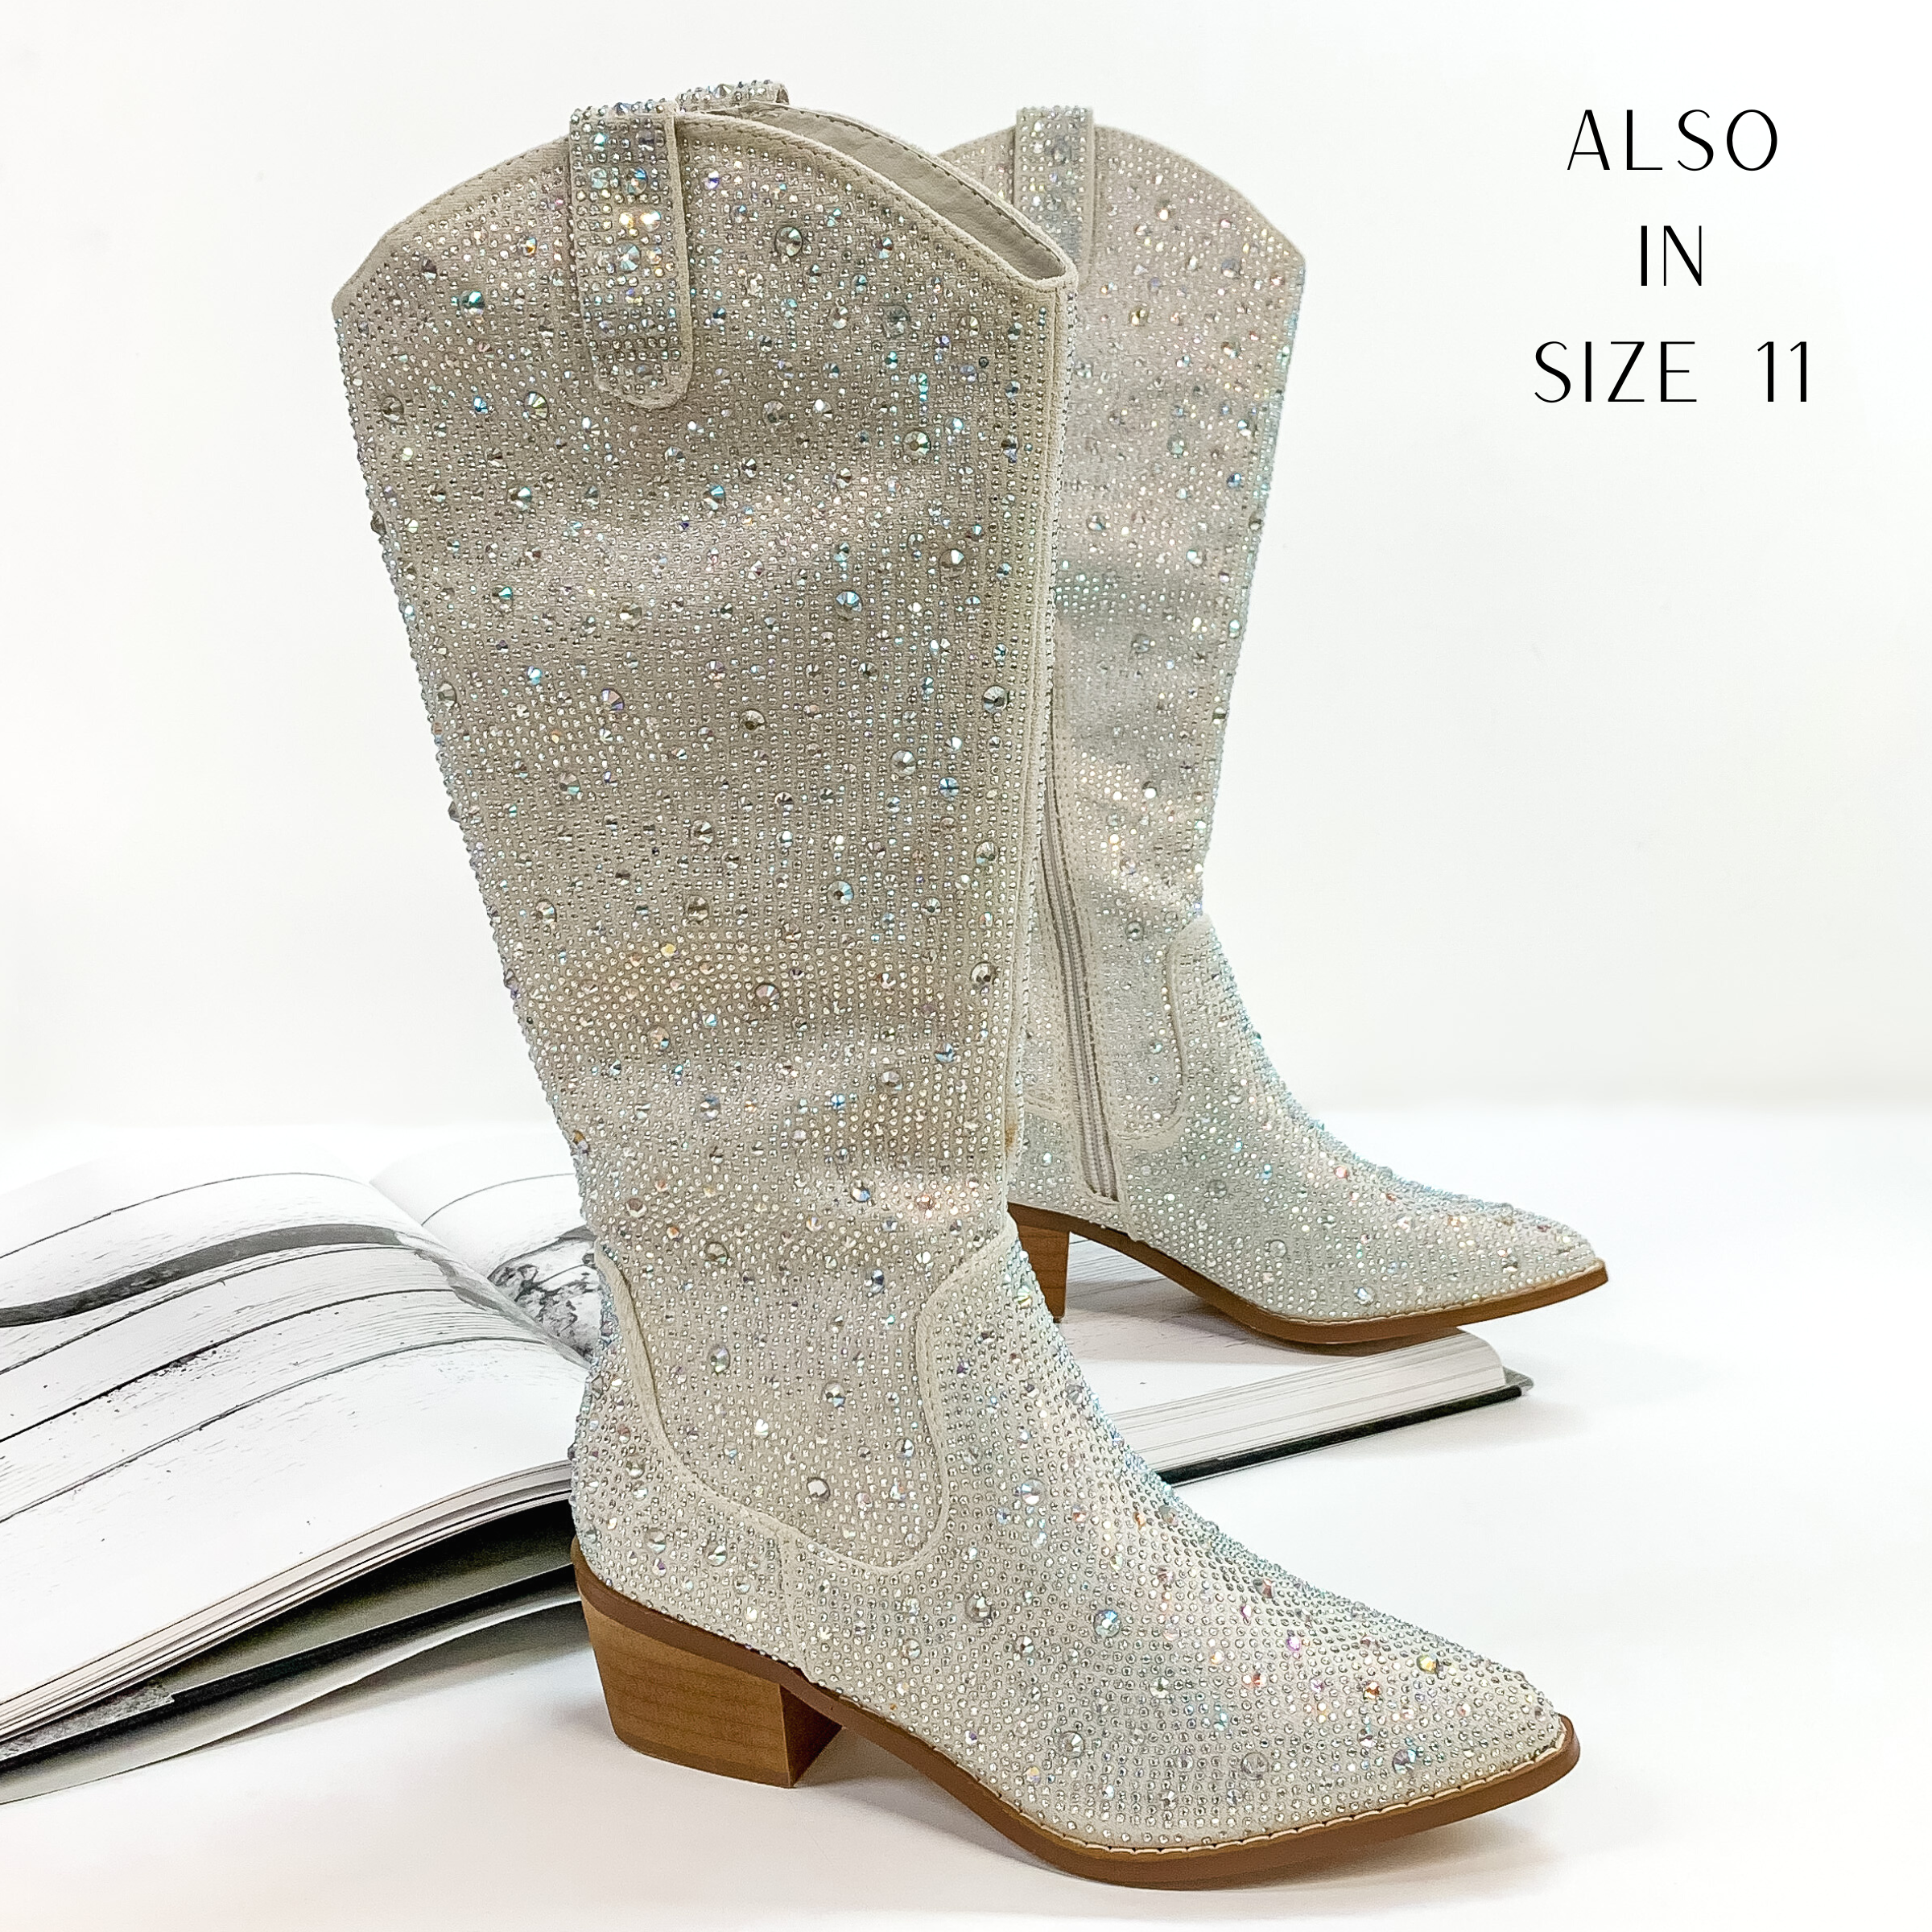 Pictured are silver cowboy boots with ab crystals covering the entire boot. These boots also include a tan heel and sole. These boots are pictured on front on a white background with one boot resting on an open book.